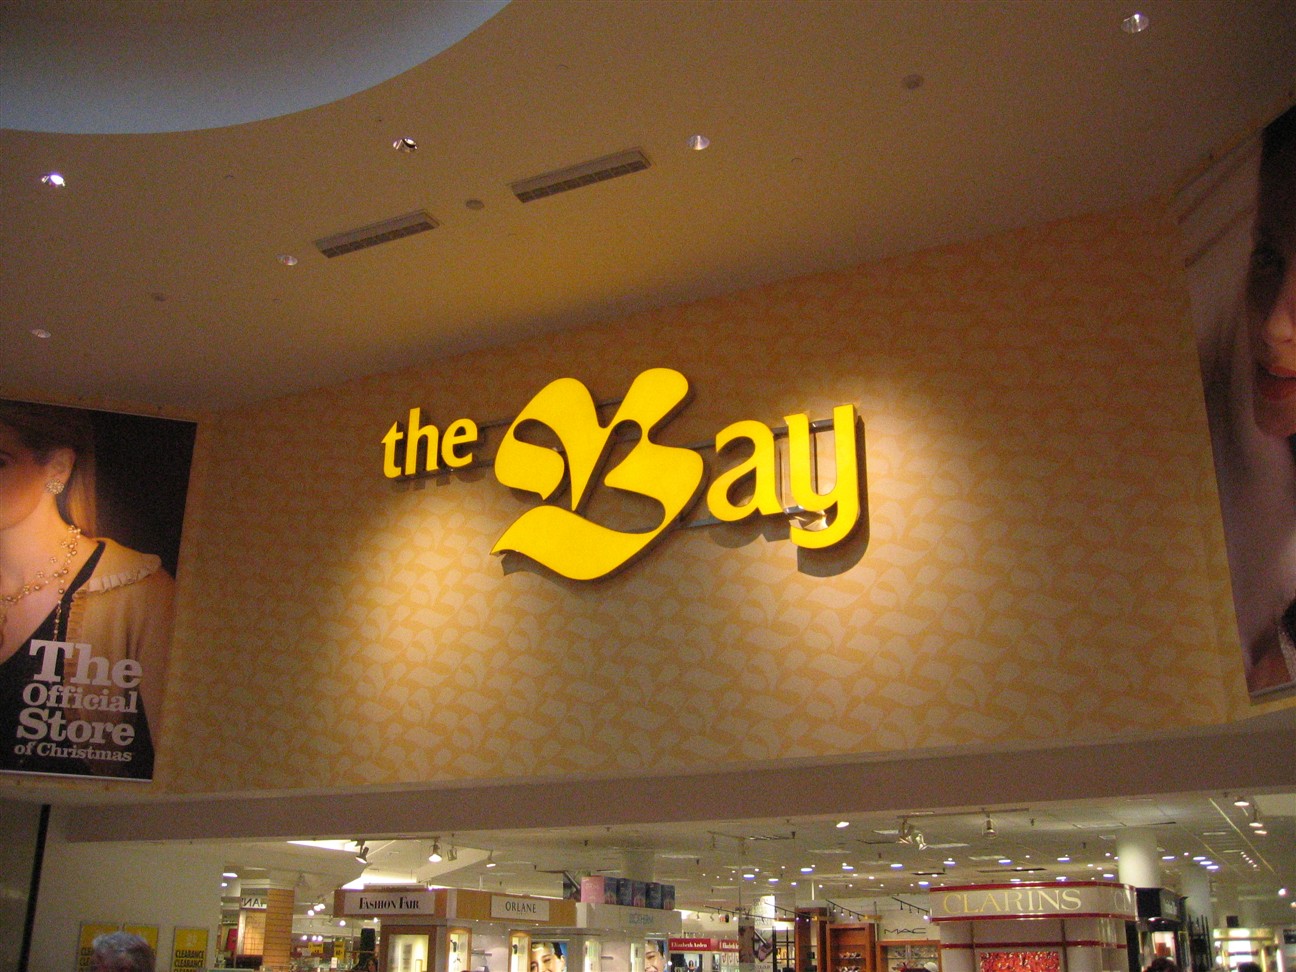 Square One Shopping Center Hudson's Bay Company in Mississauga, Ontario, Canada